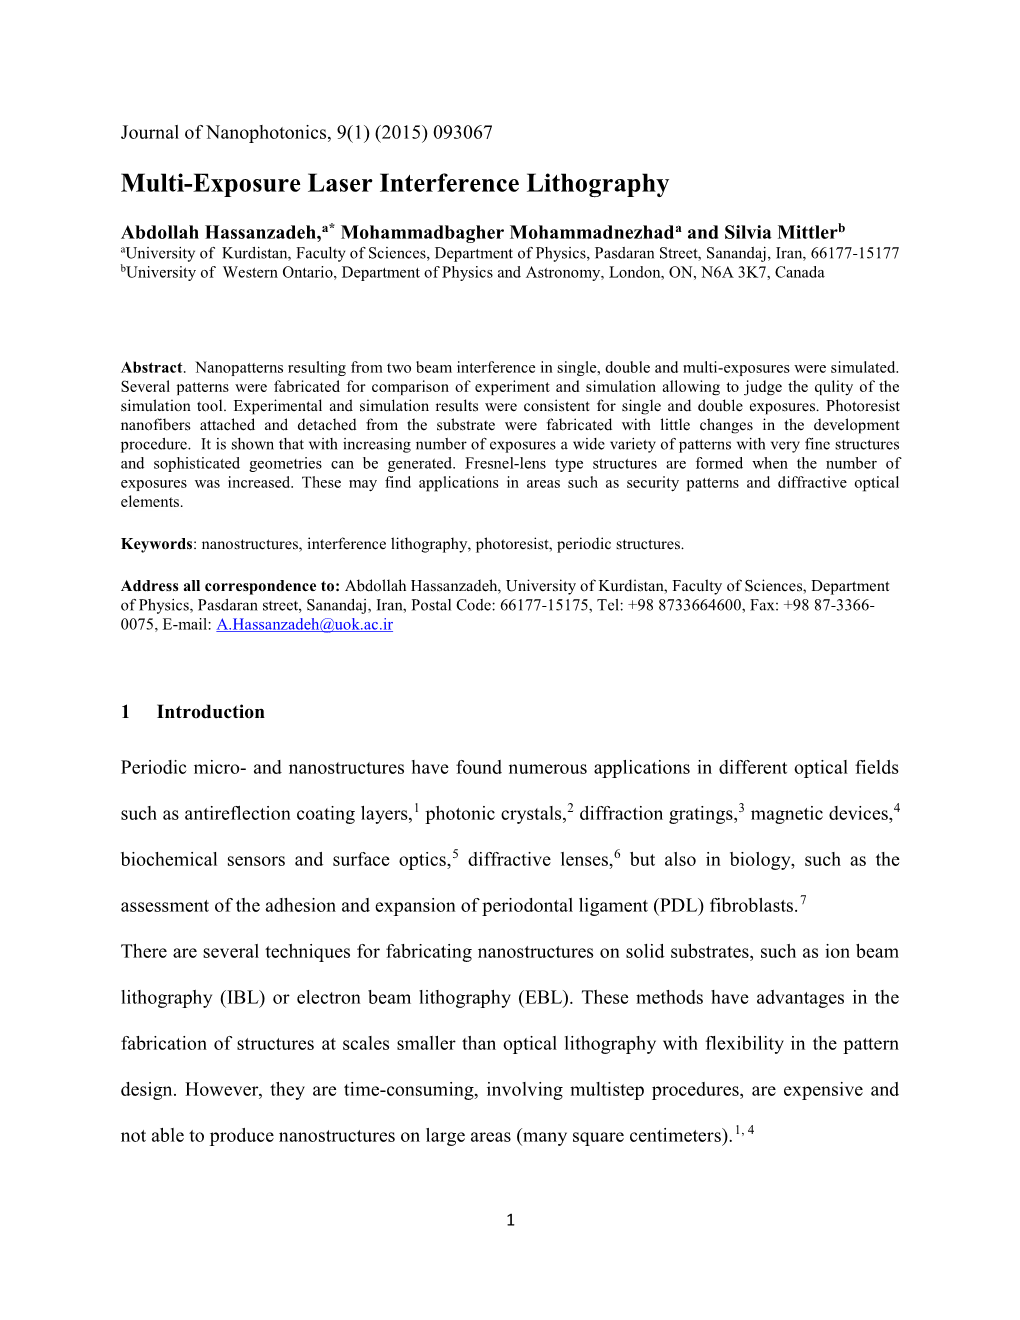 Multi-Exposure Laser Interference Lithography